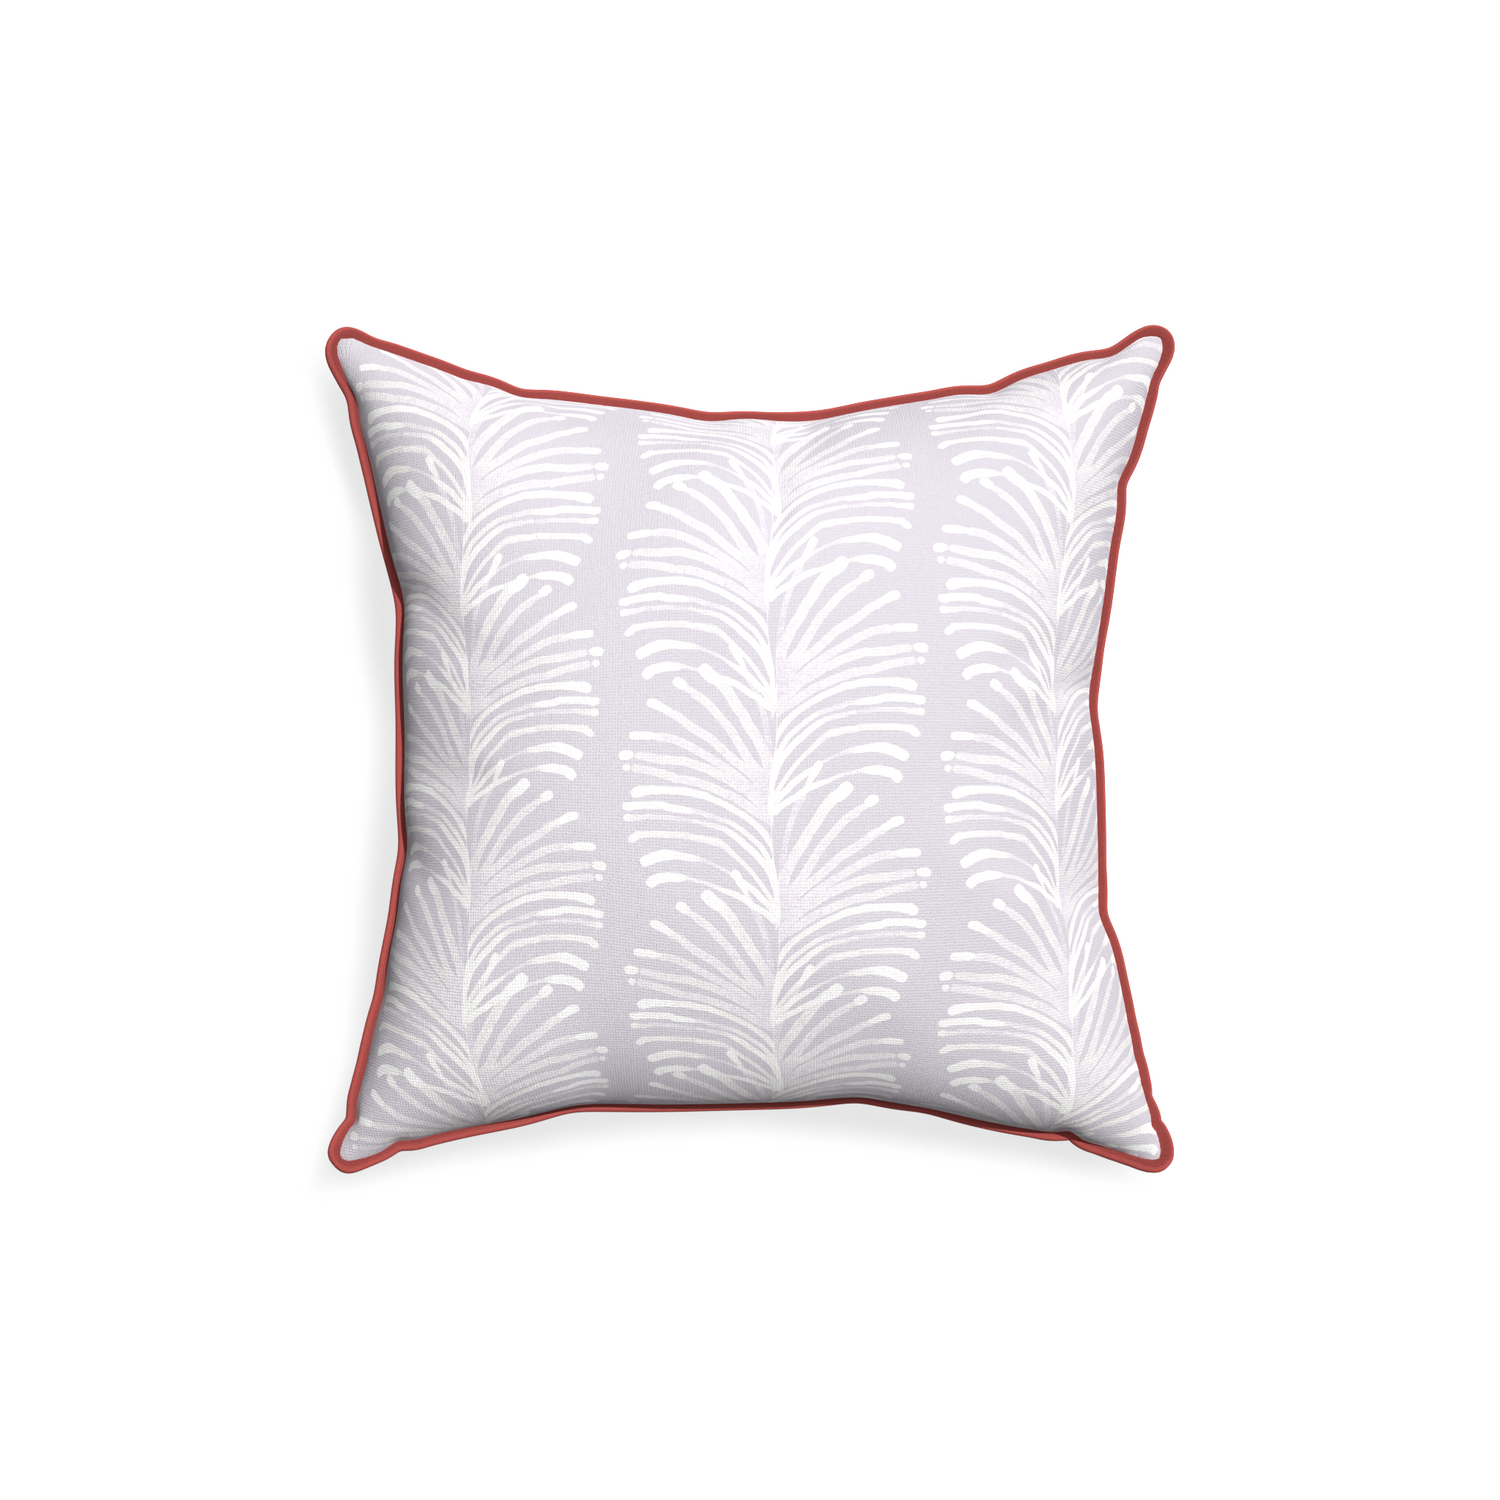 18-square emma lavender custom pillow with c piping on white background